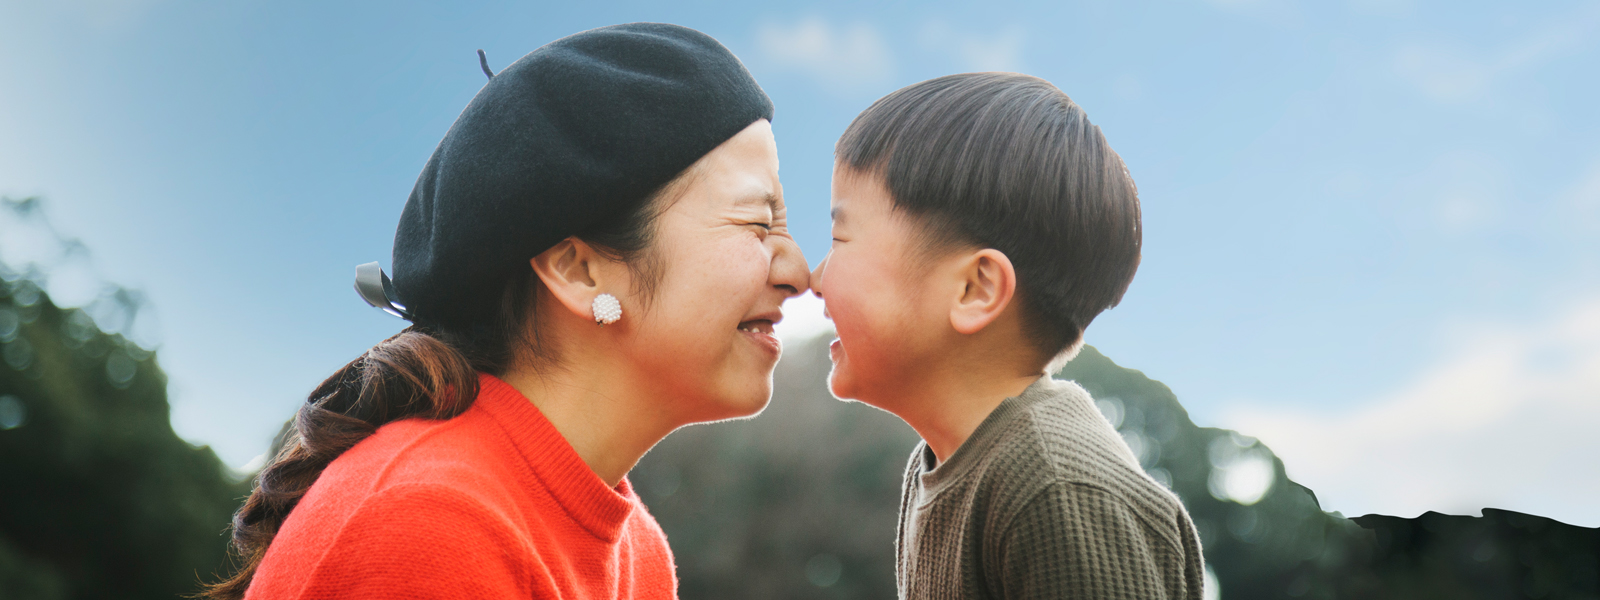 parent and child laughing while touching noses